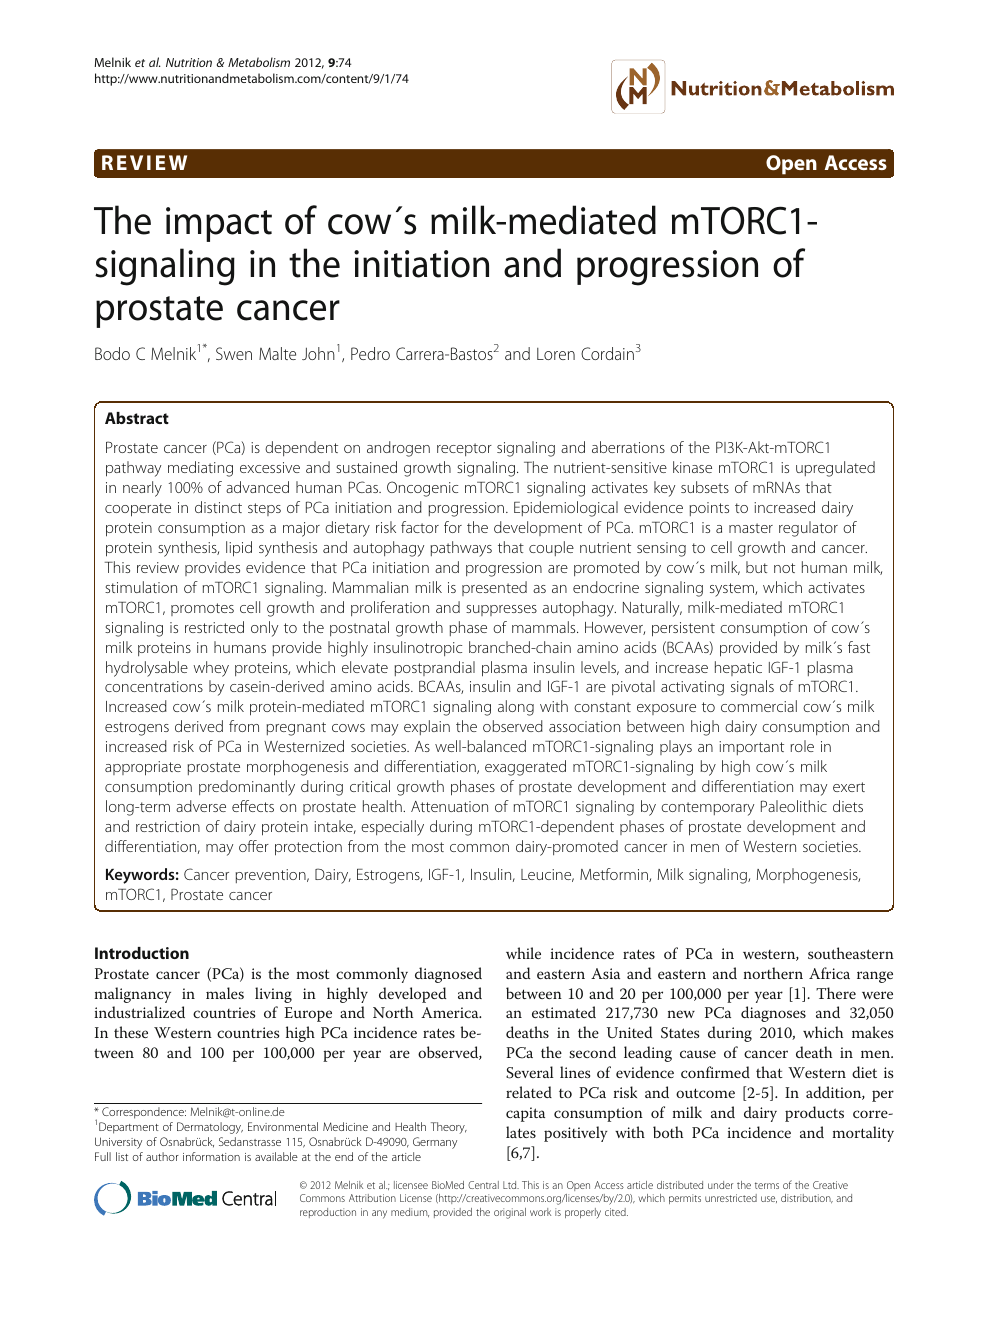 The Impact Of Cow S Milk Mediated Mtorc1 Signaling In The Initiation And Progression Of Prostate Cancer Topic Of Research Paper In Biological Sciences Download Scholarly Article Pdf And Read For Free On Cyberleninka